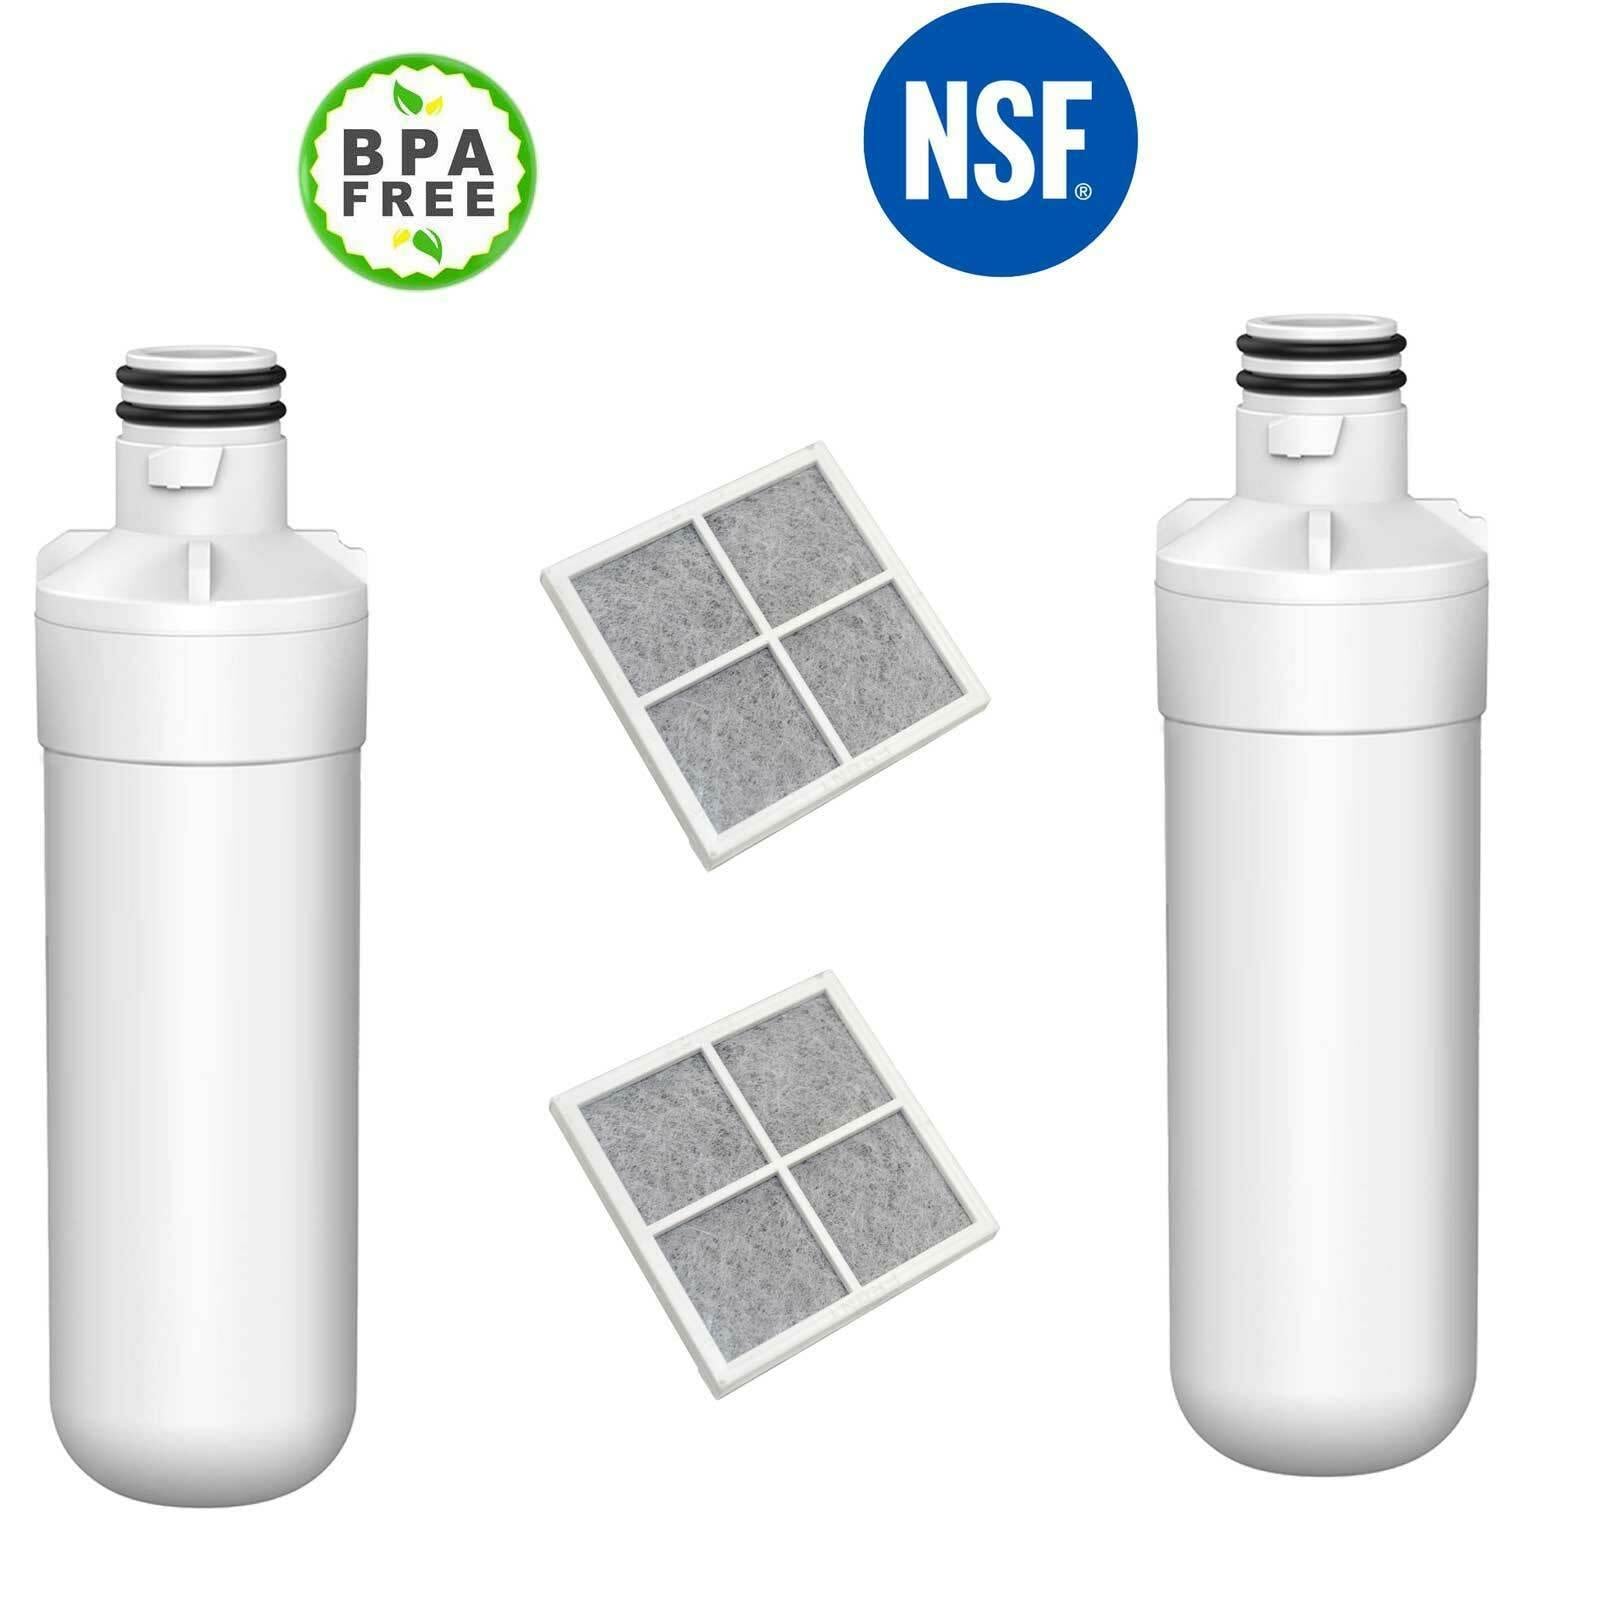 Fridge Filter For LG LT1000P Compatible with LG LT120F replacing air filter Sparesbarn